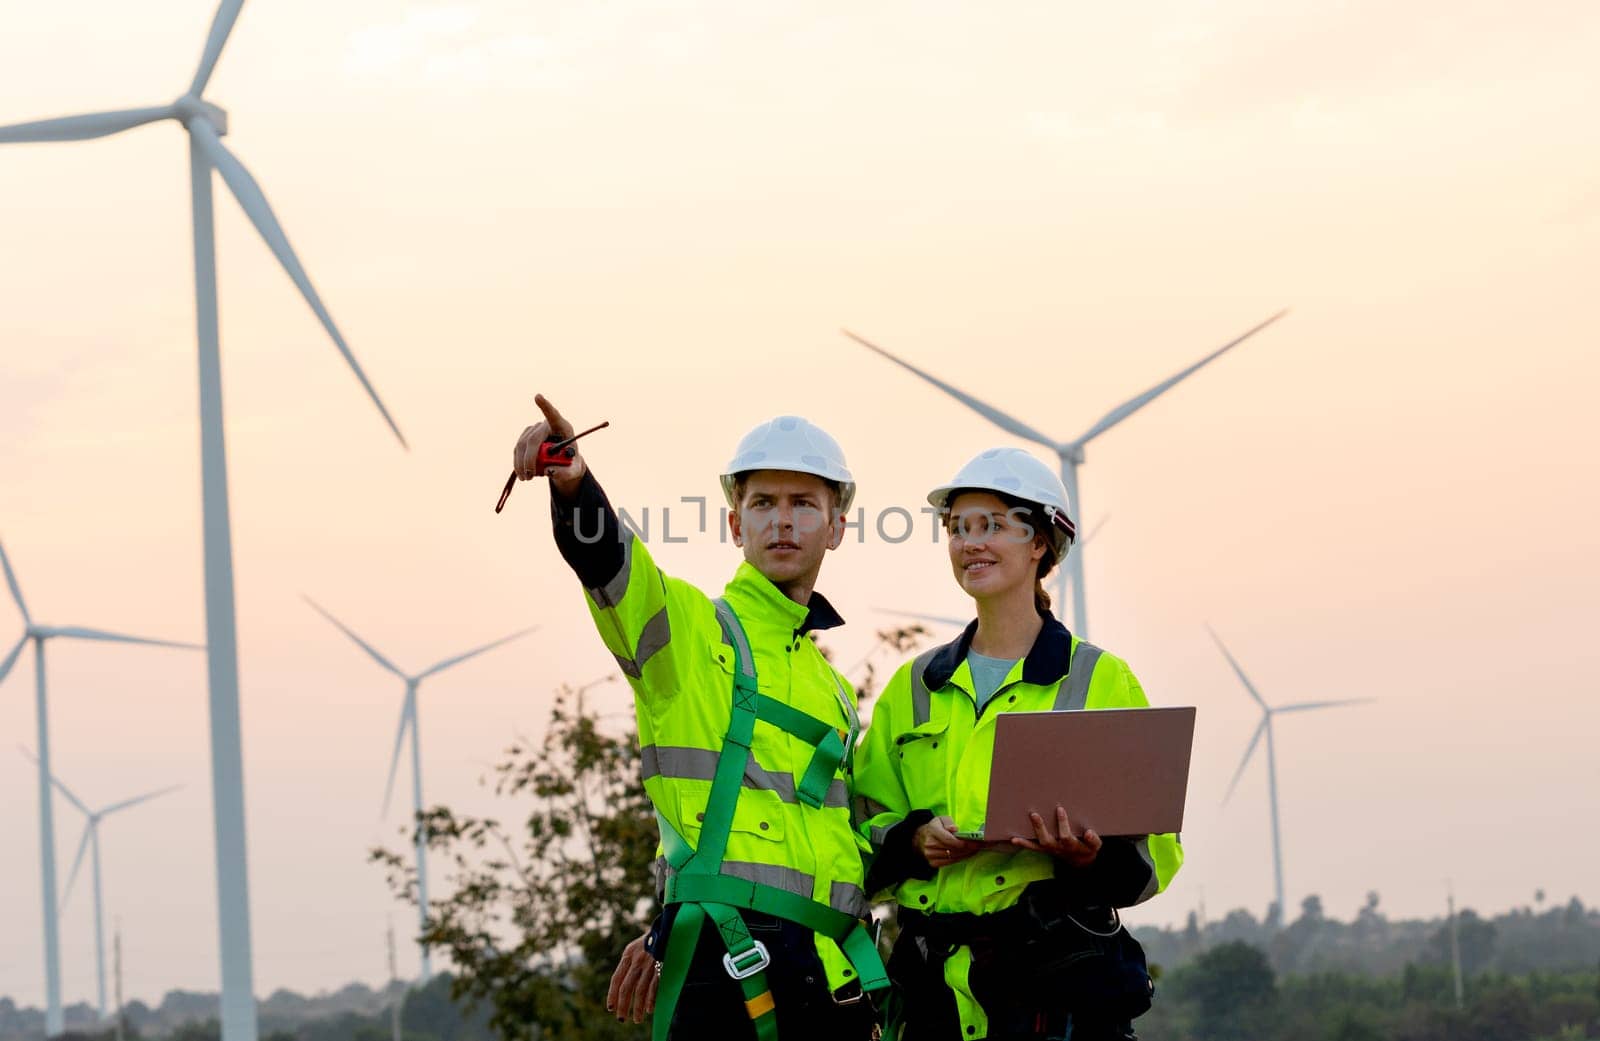 Technician workers use laptop to work and stay with her co-worker point to left side in evening with windmill or wind turbine on the background.